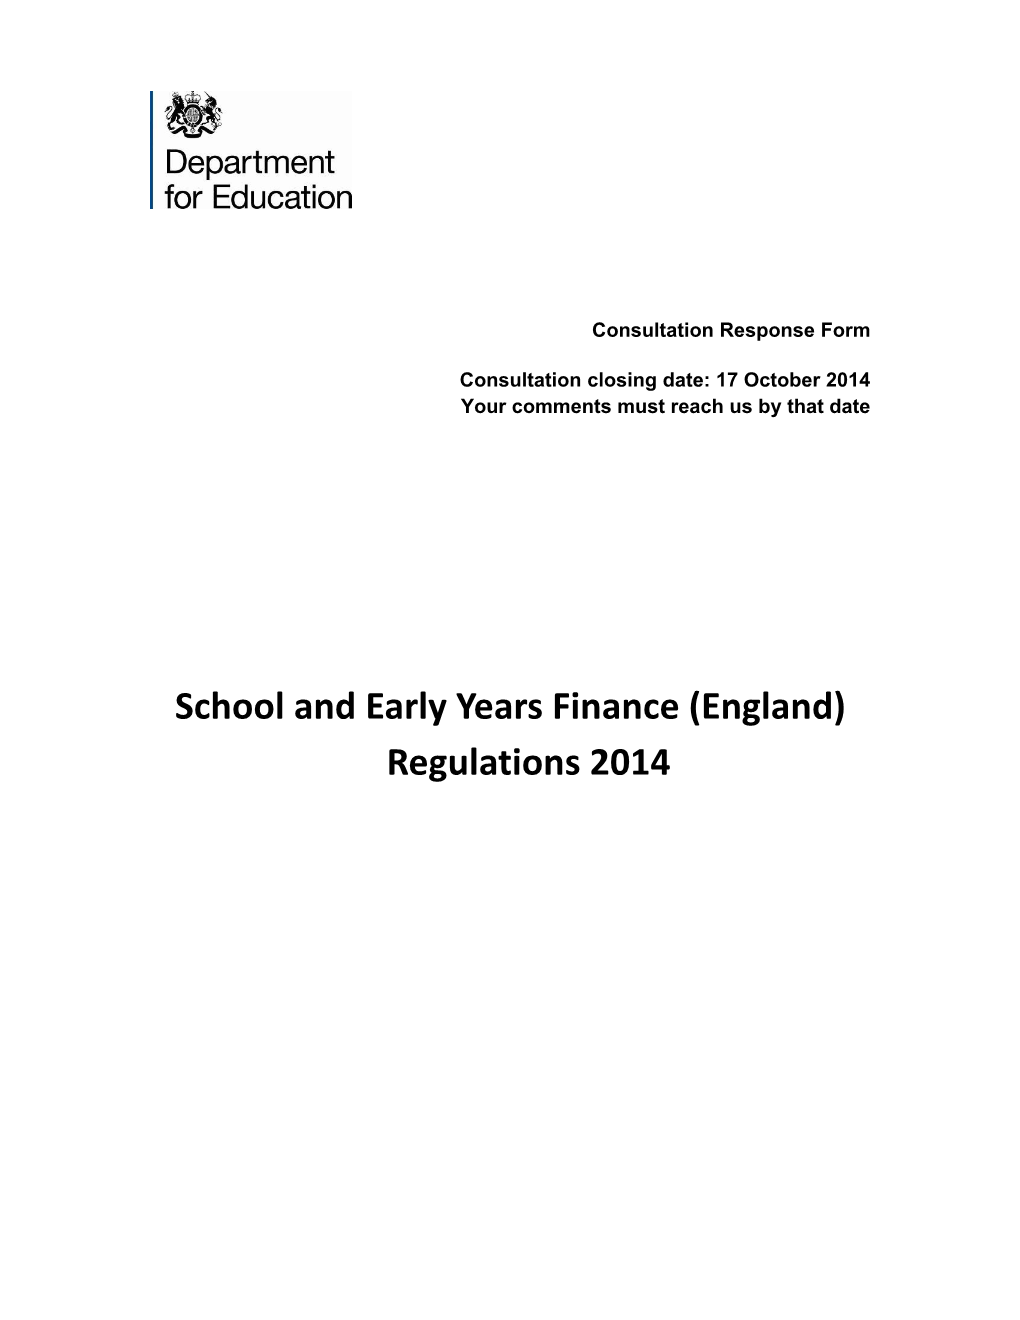 School and Early Years Finance (England) Regulations 2014